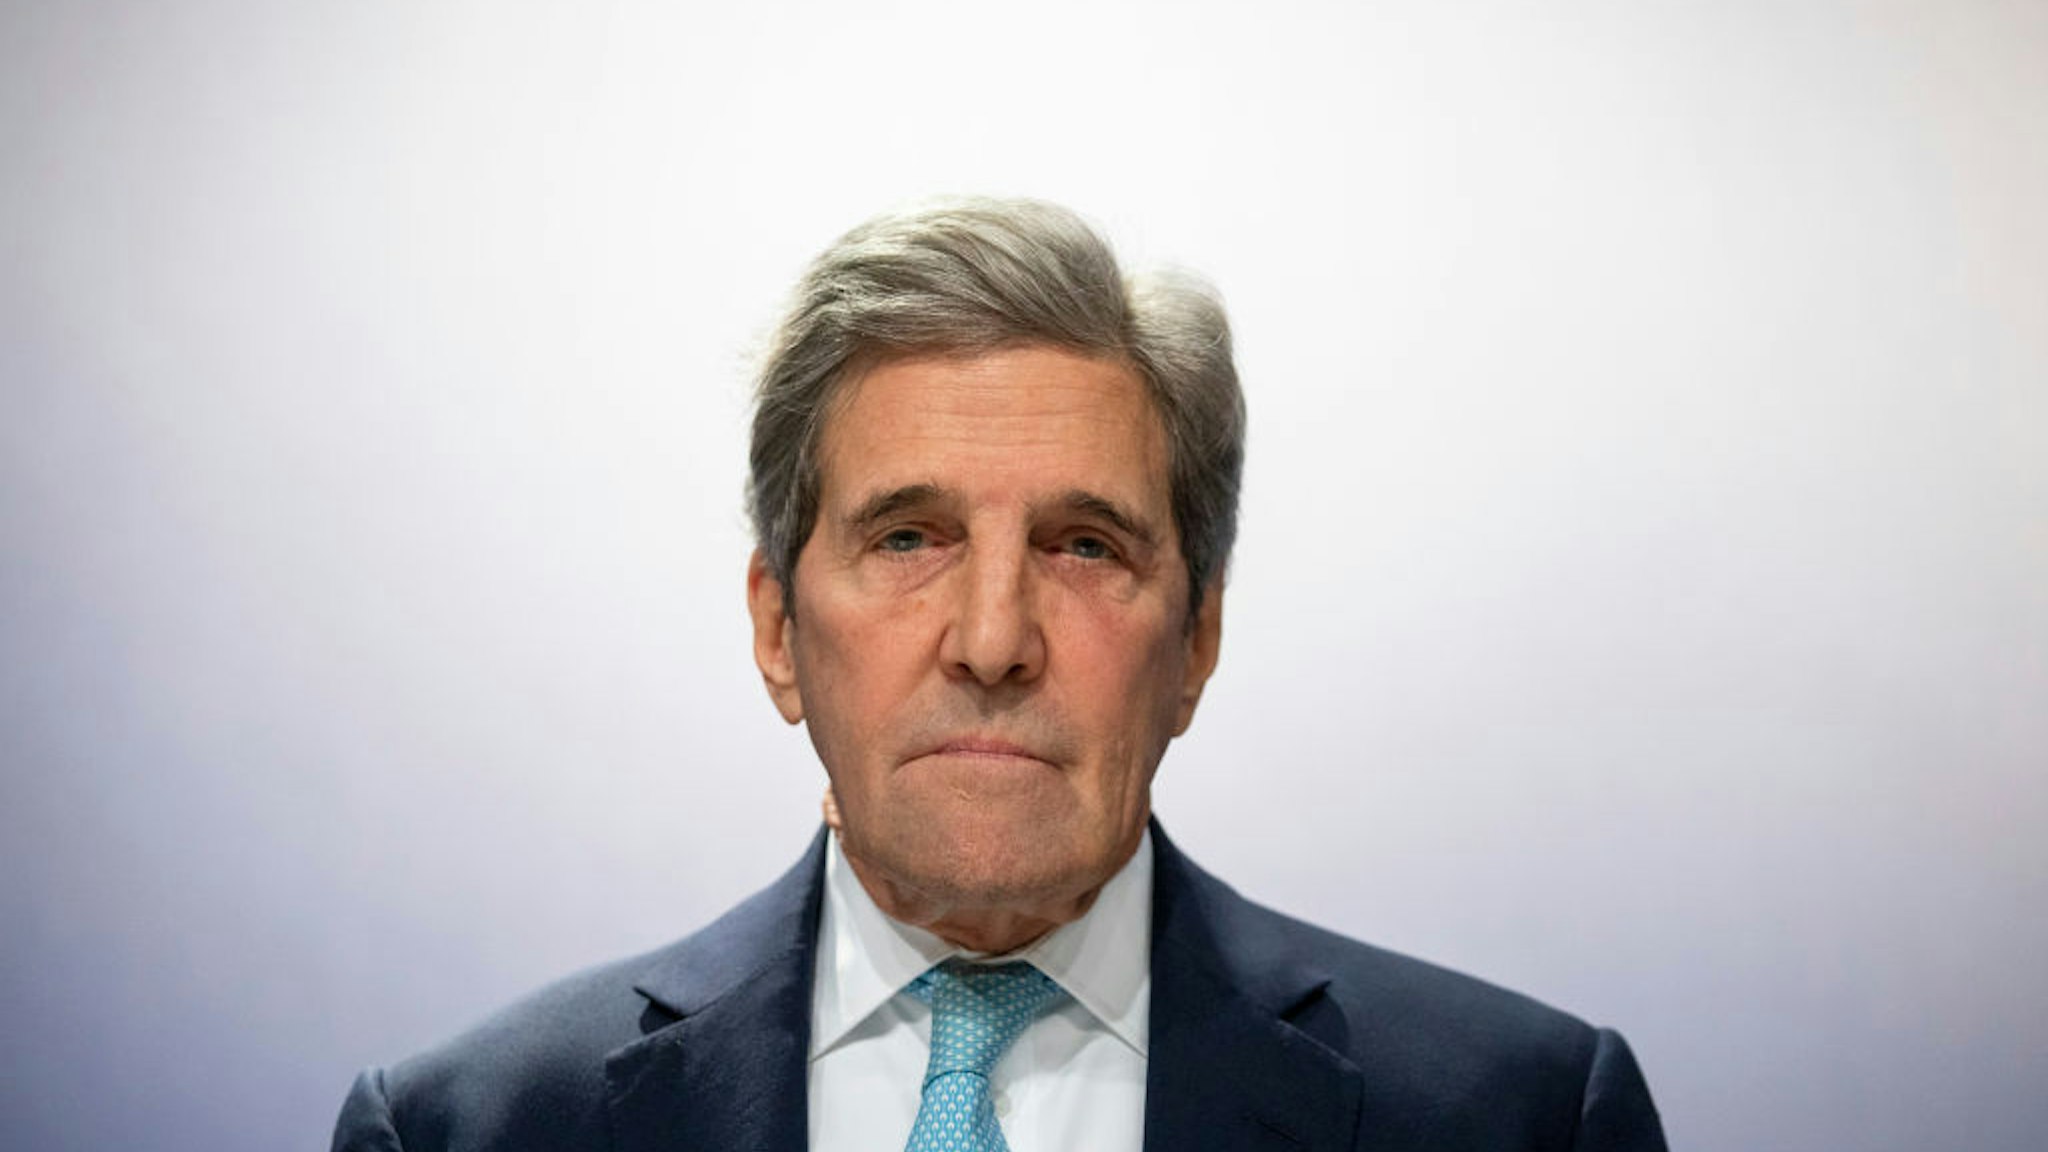 Former US Secretary of State John Kerry attends to a conference at the COP25 Climate Conference on December 10, 2019 in Madrid, Spain.